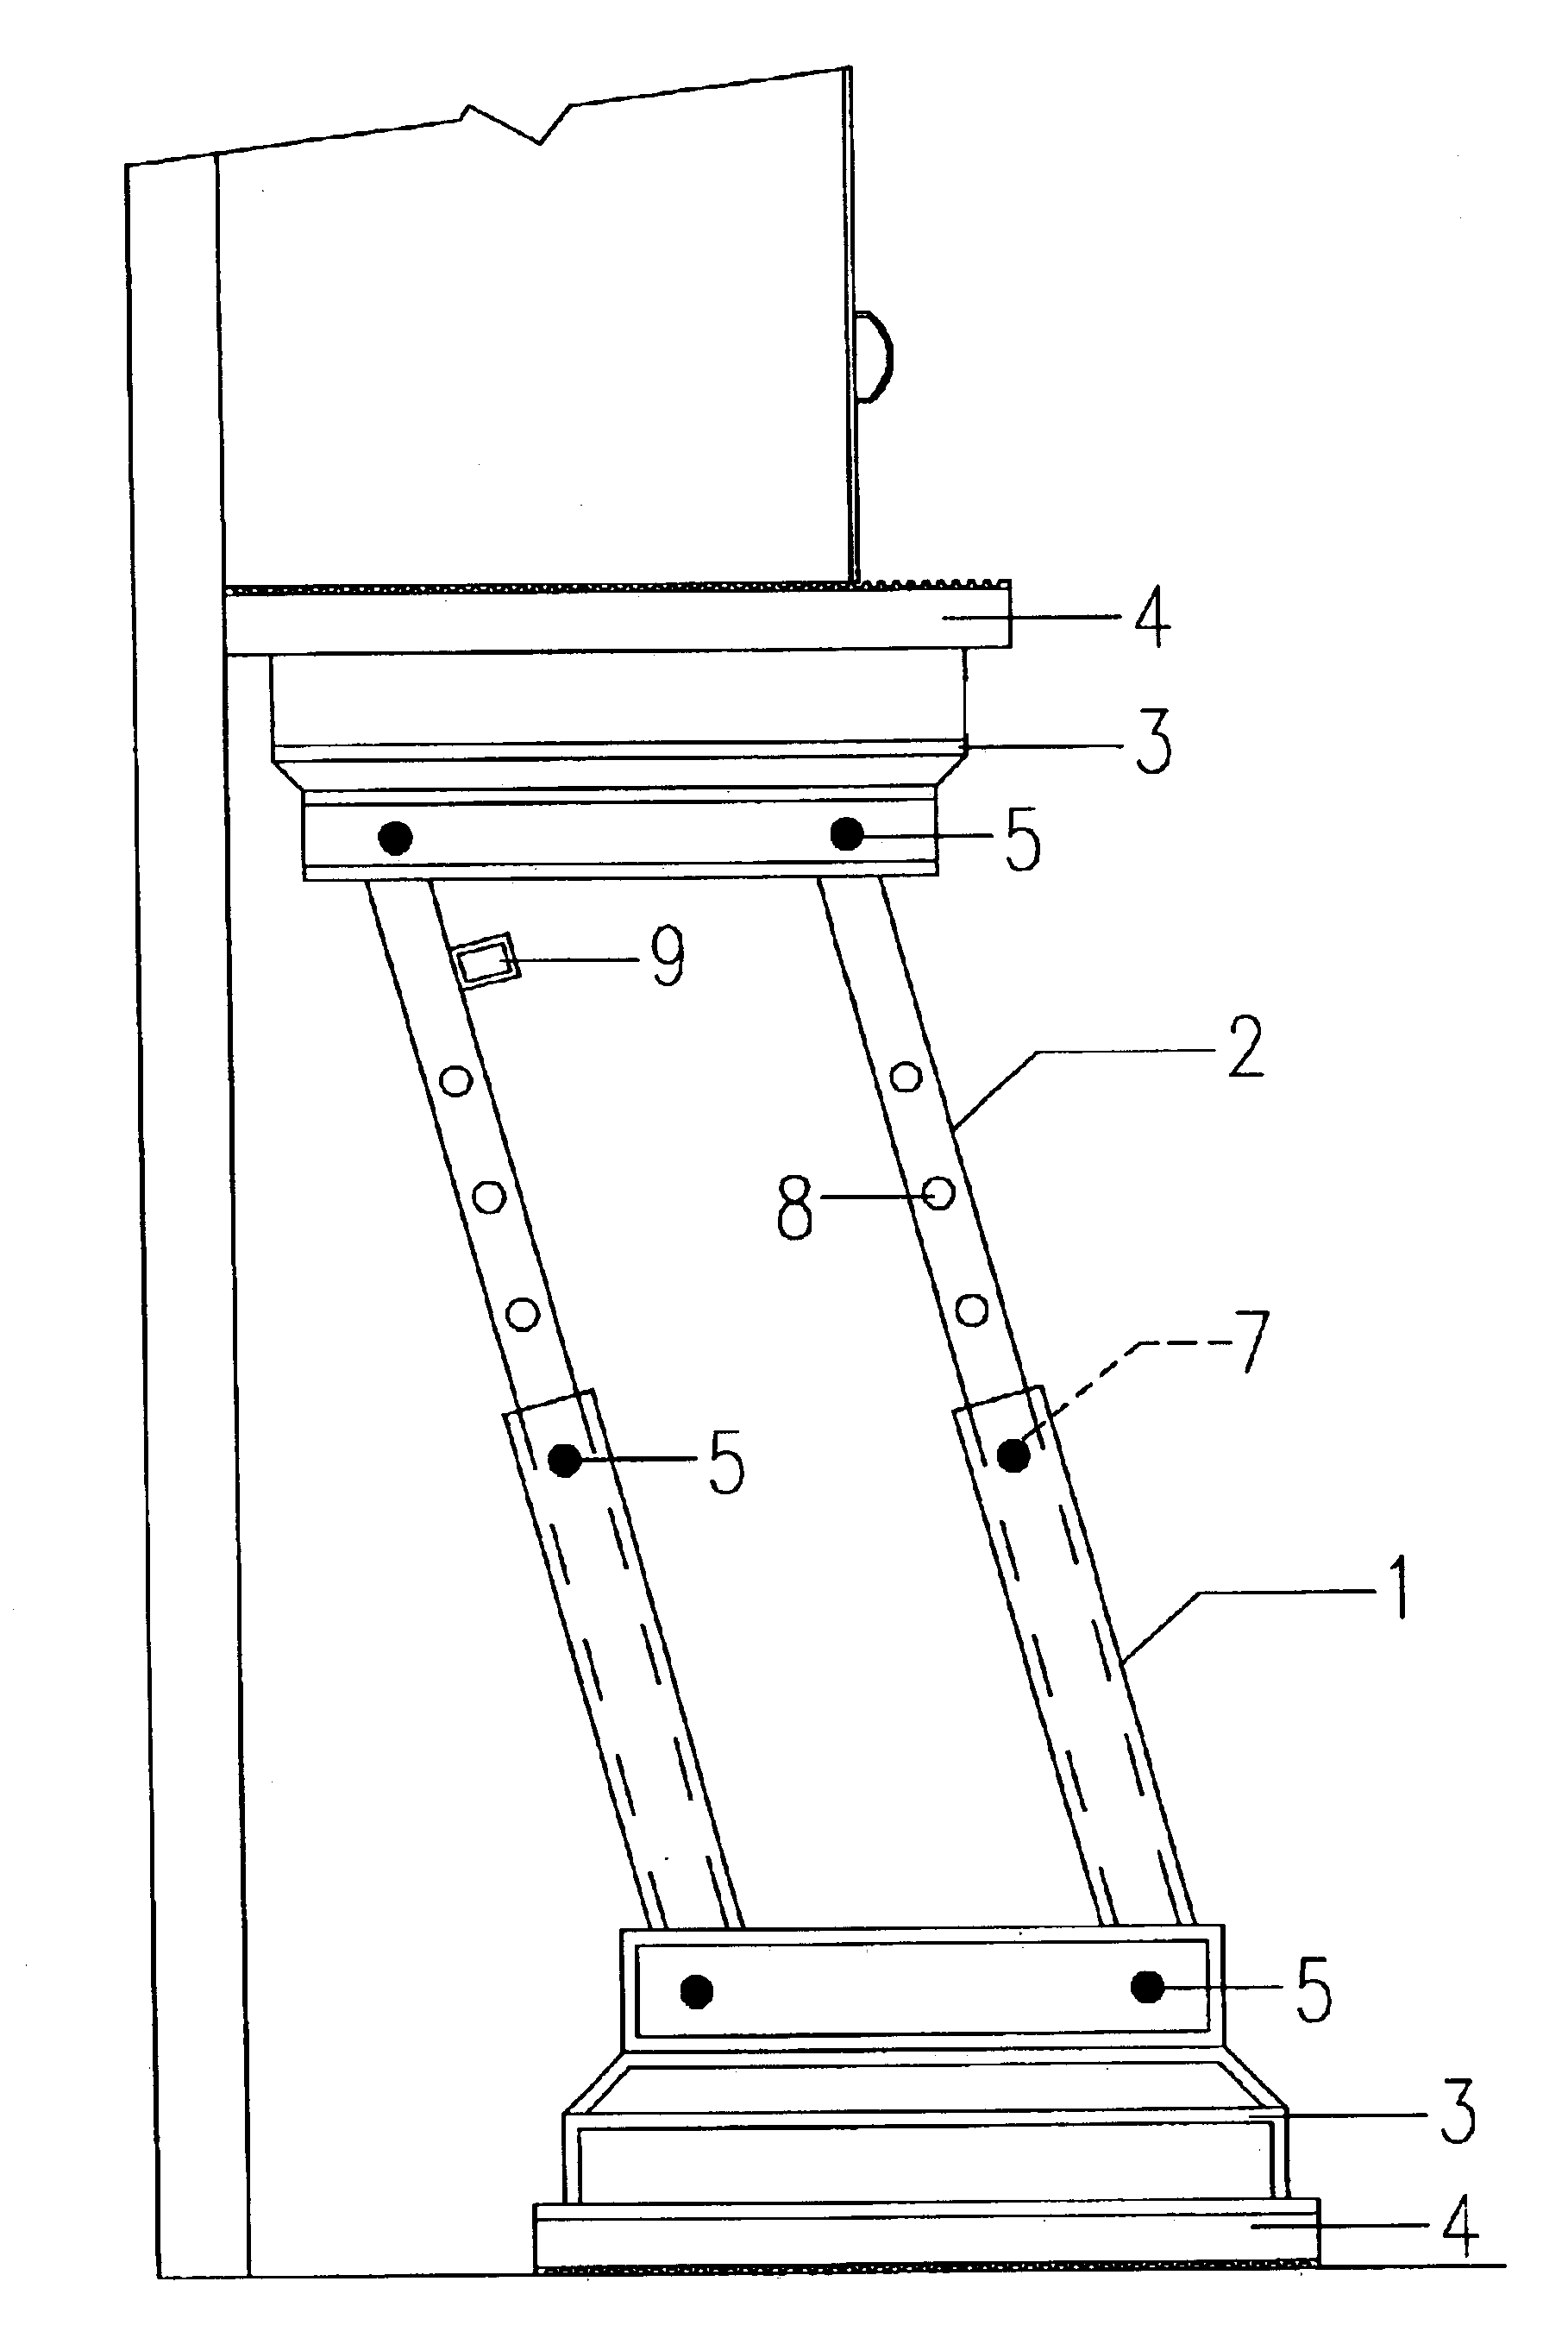 Adjustable positioning device for cabinets and construction panels